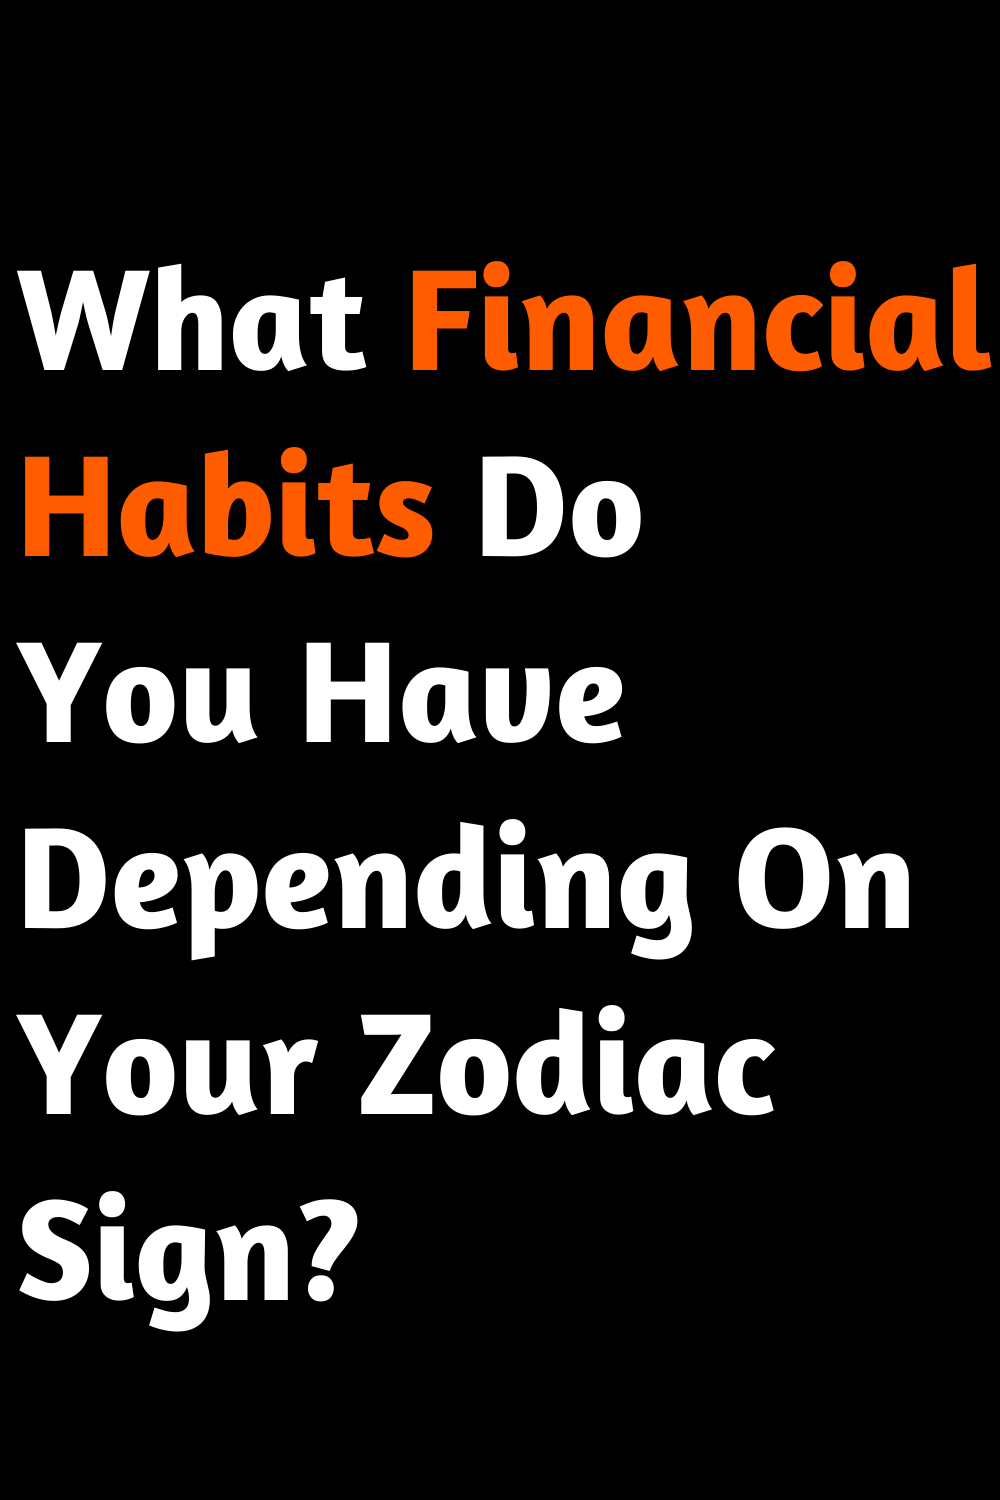 What Financial Habits Do You Have Depending On Your Zodiac Sign?